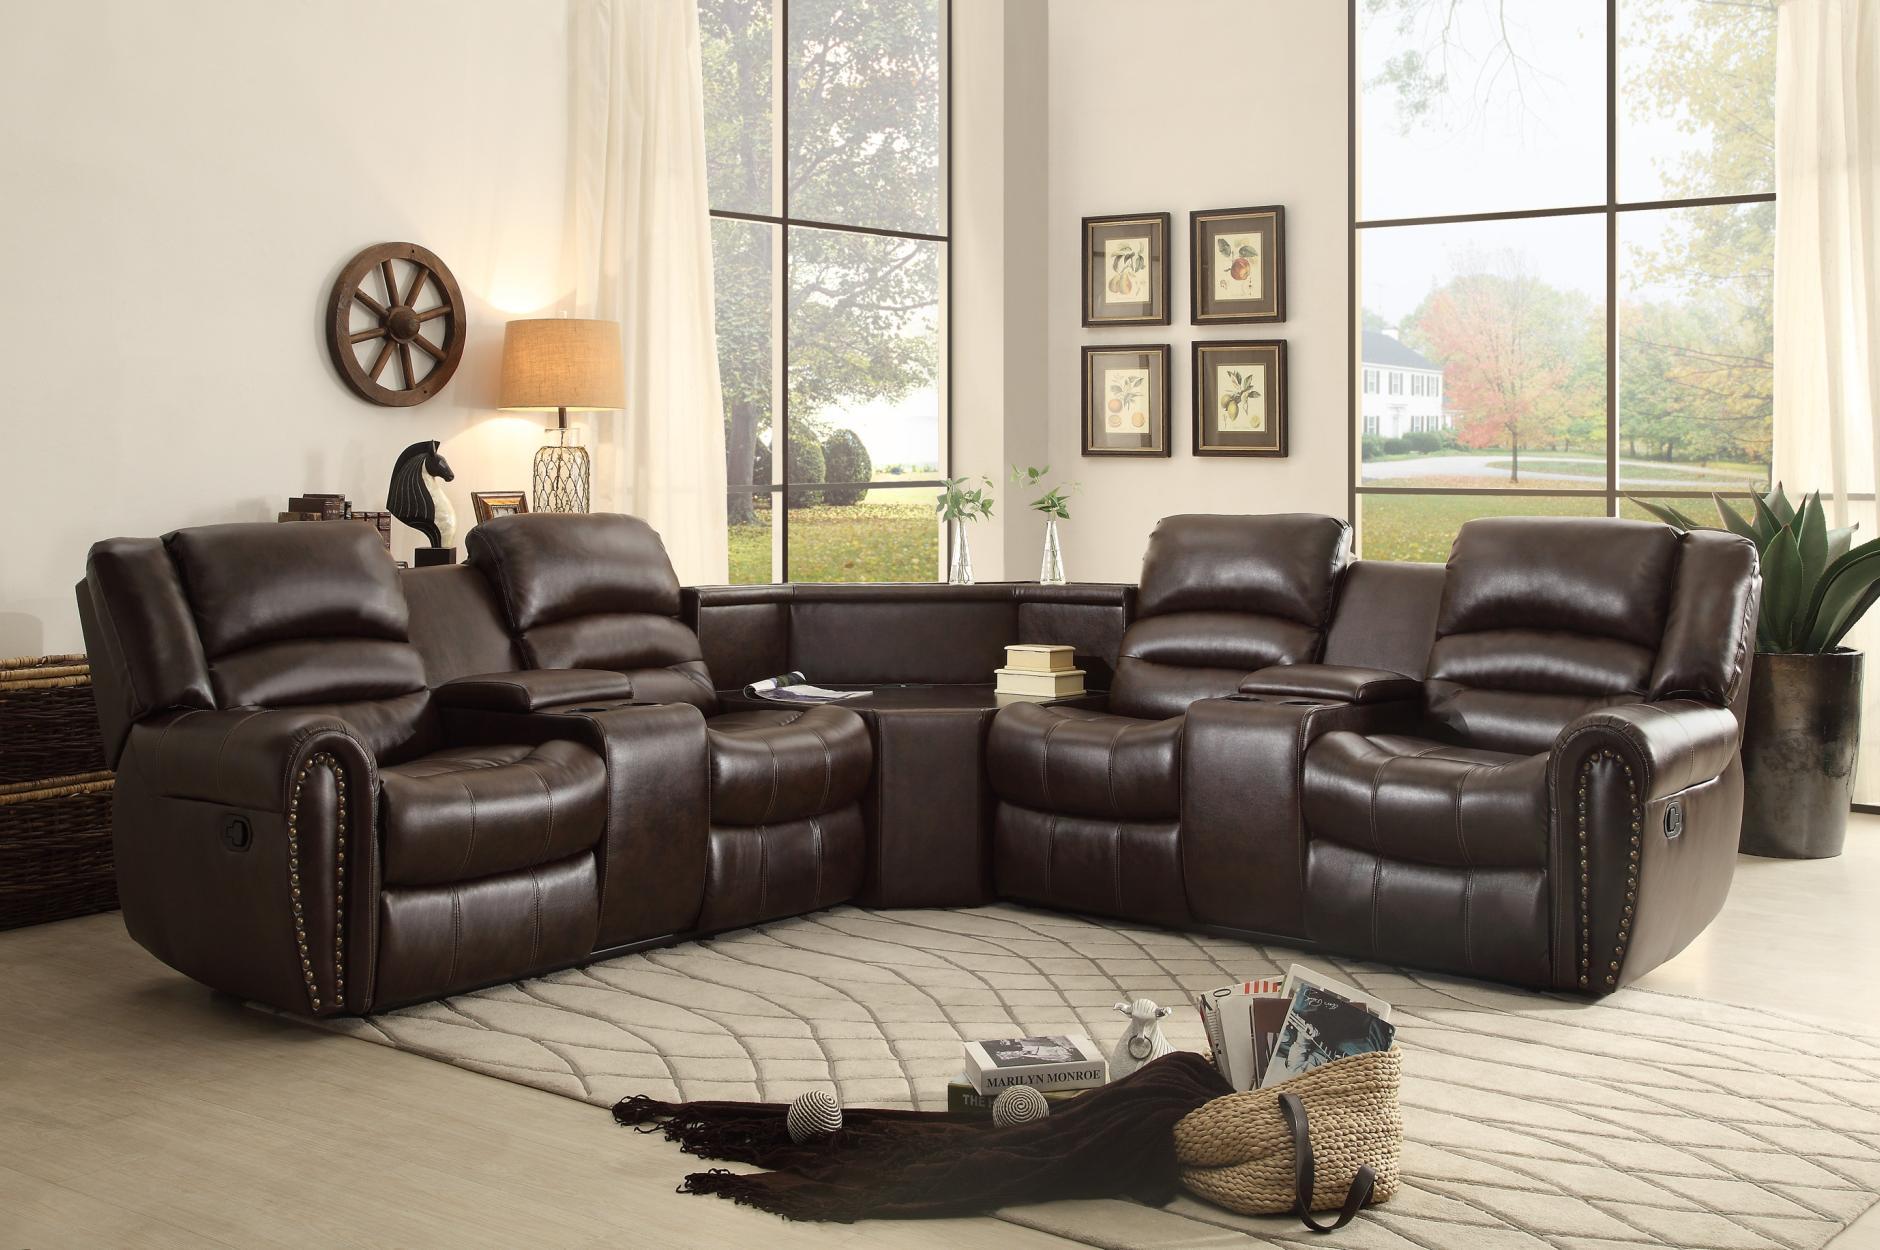 

        
Homelegance Palmyra Reclining Sectional Brown Bonded Leather 00782359237893
